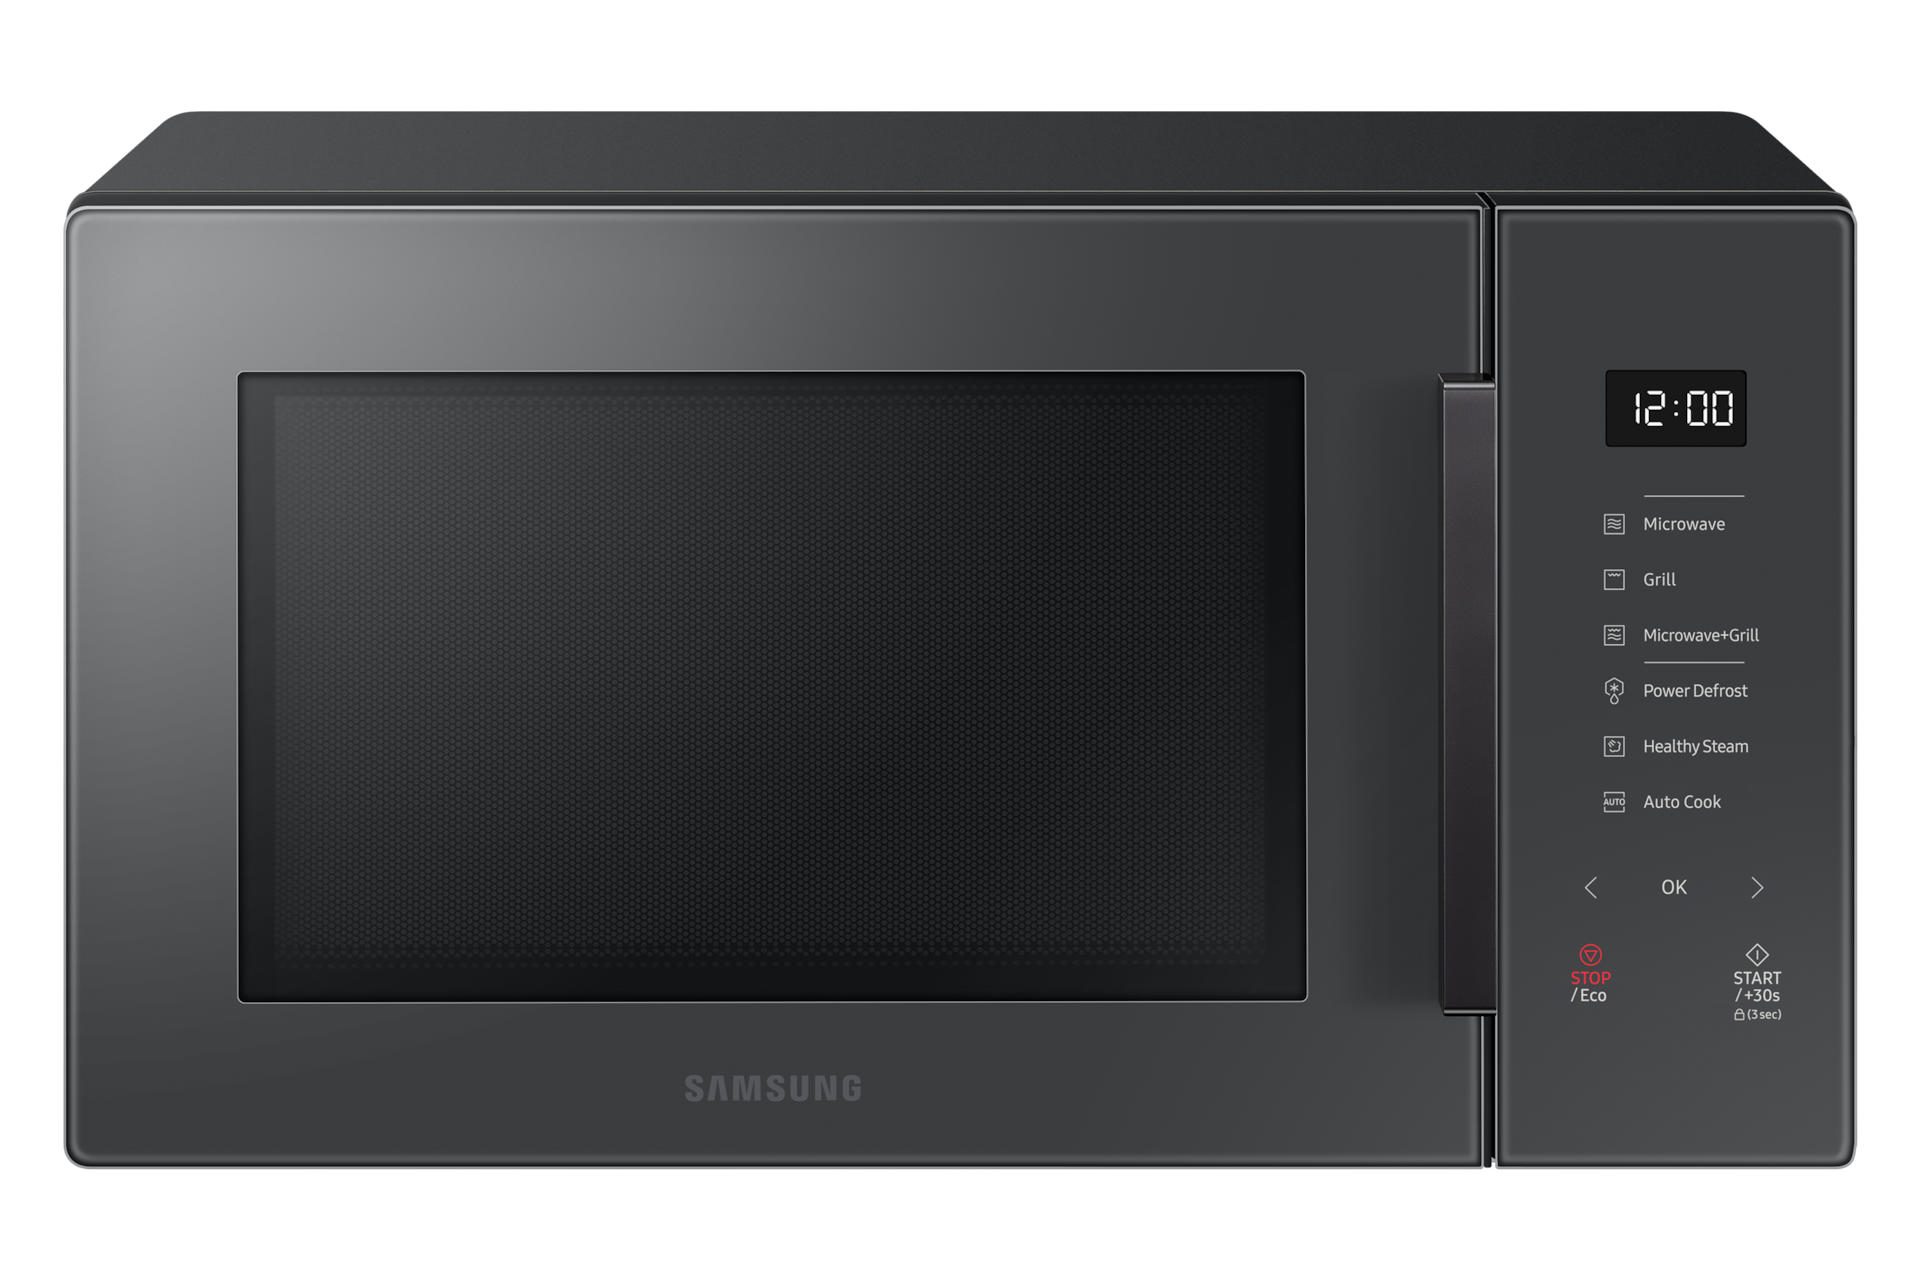 https://images.samsung.com/is/image/samsung/it-microwave-oven-grill-mg30t5018uc-mg30t5018uc-et-frontcosmicgray-249062574?$650_519_PNG$